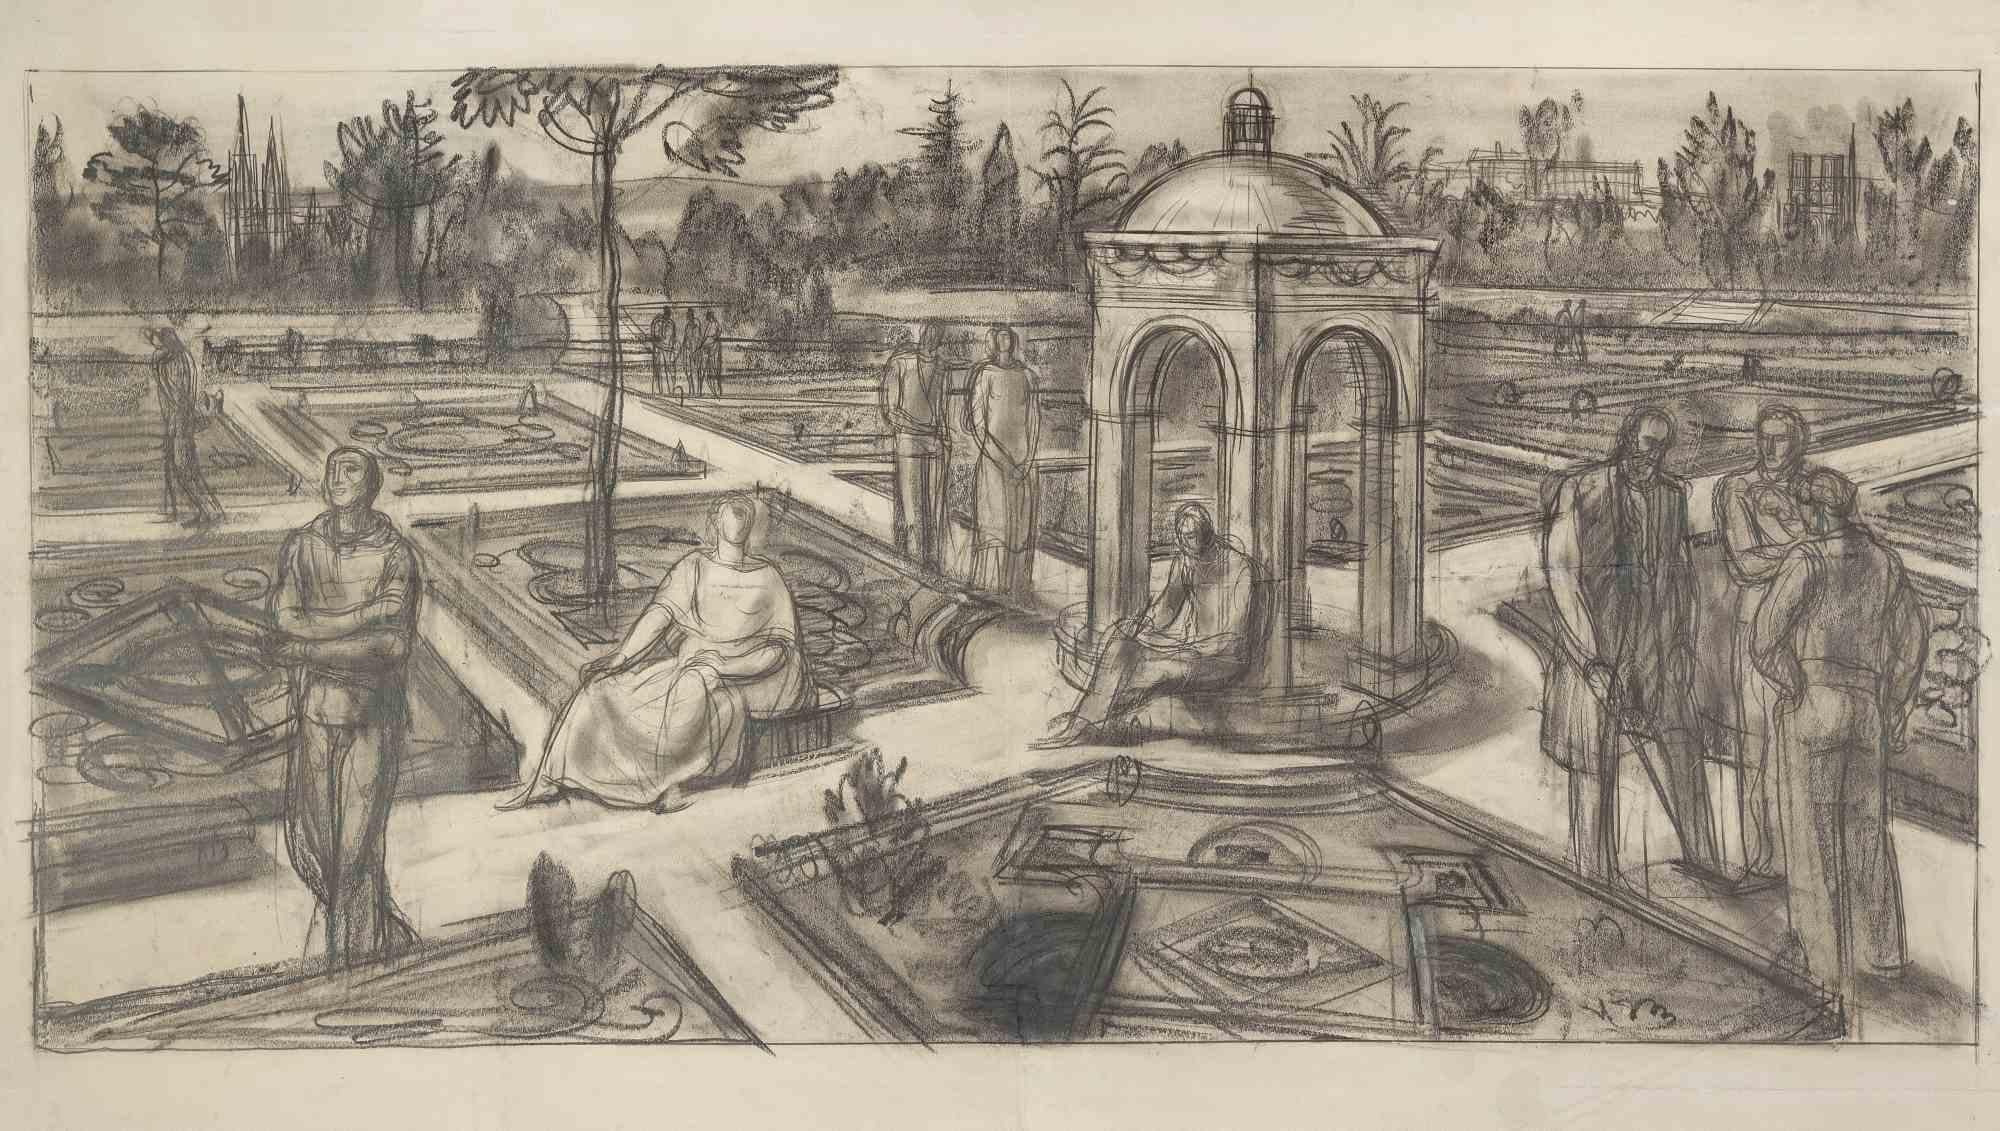 Figures in the garden is an artwork realized by Gustave Bourgogne in 1930s. 

Pencil on paper

Good conditions.

Gustave Bourgogne (1888-1968), a french painter born in 1888 in Veigné in Indre et Loire and died in Paris in 1968. He excelled in